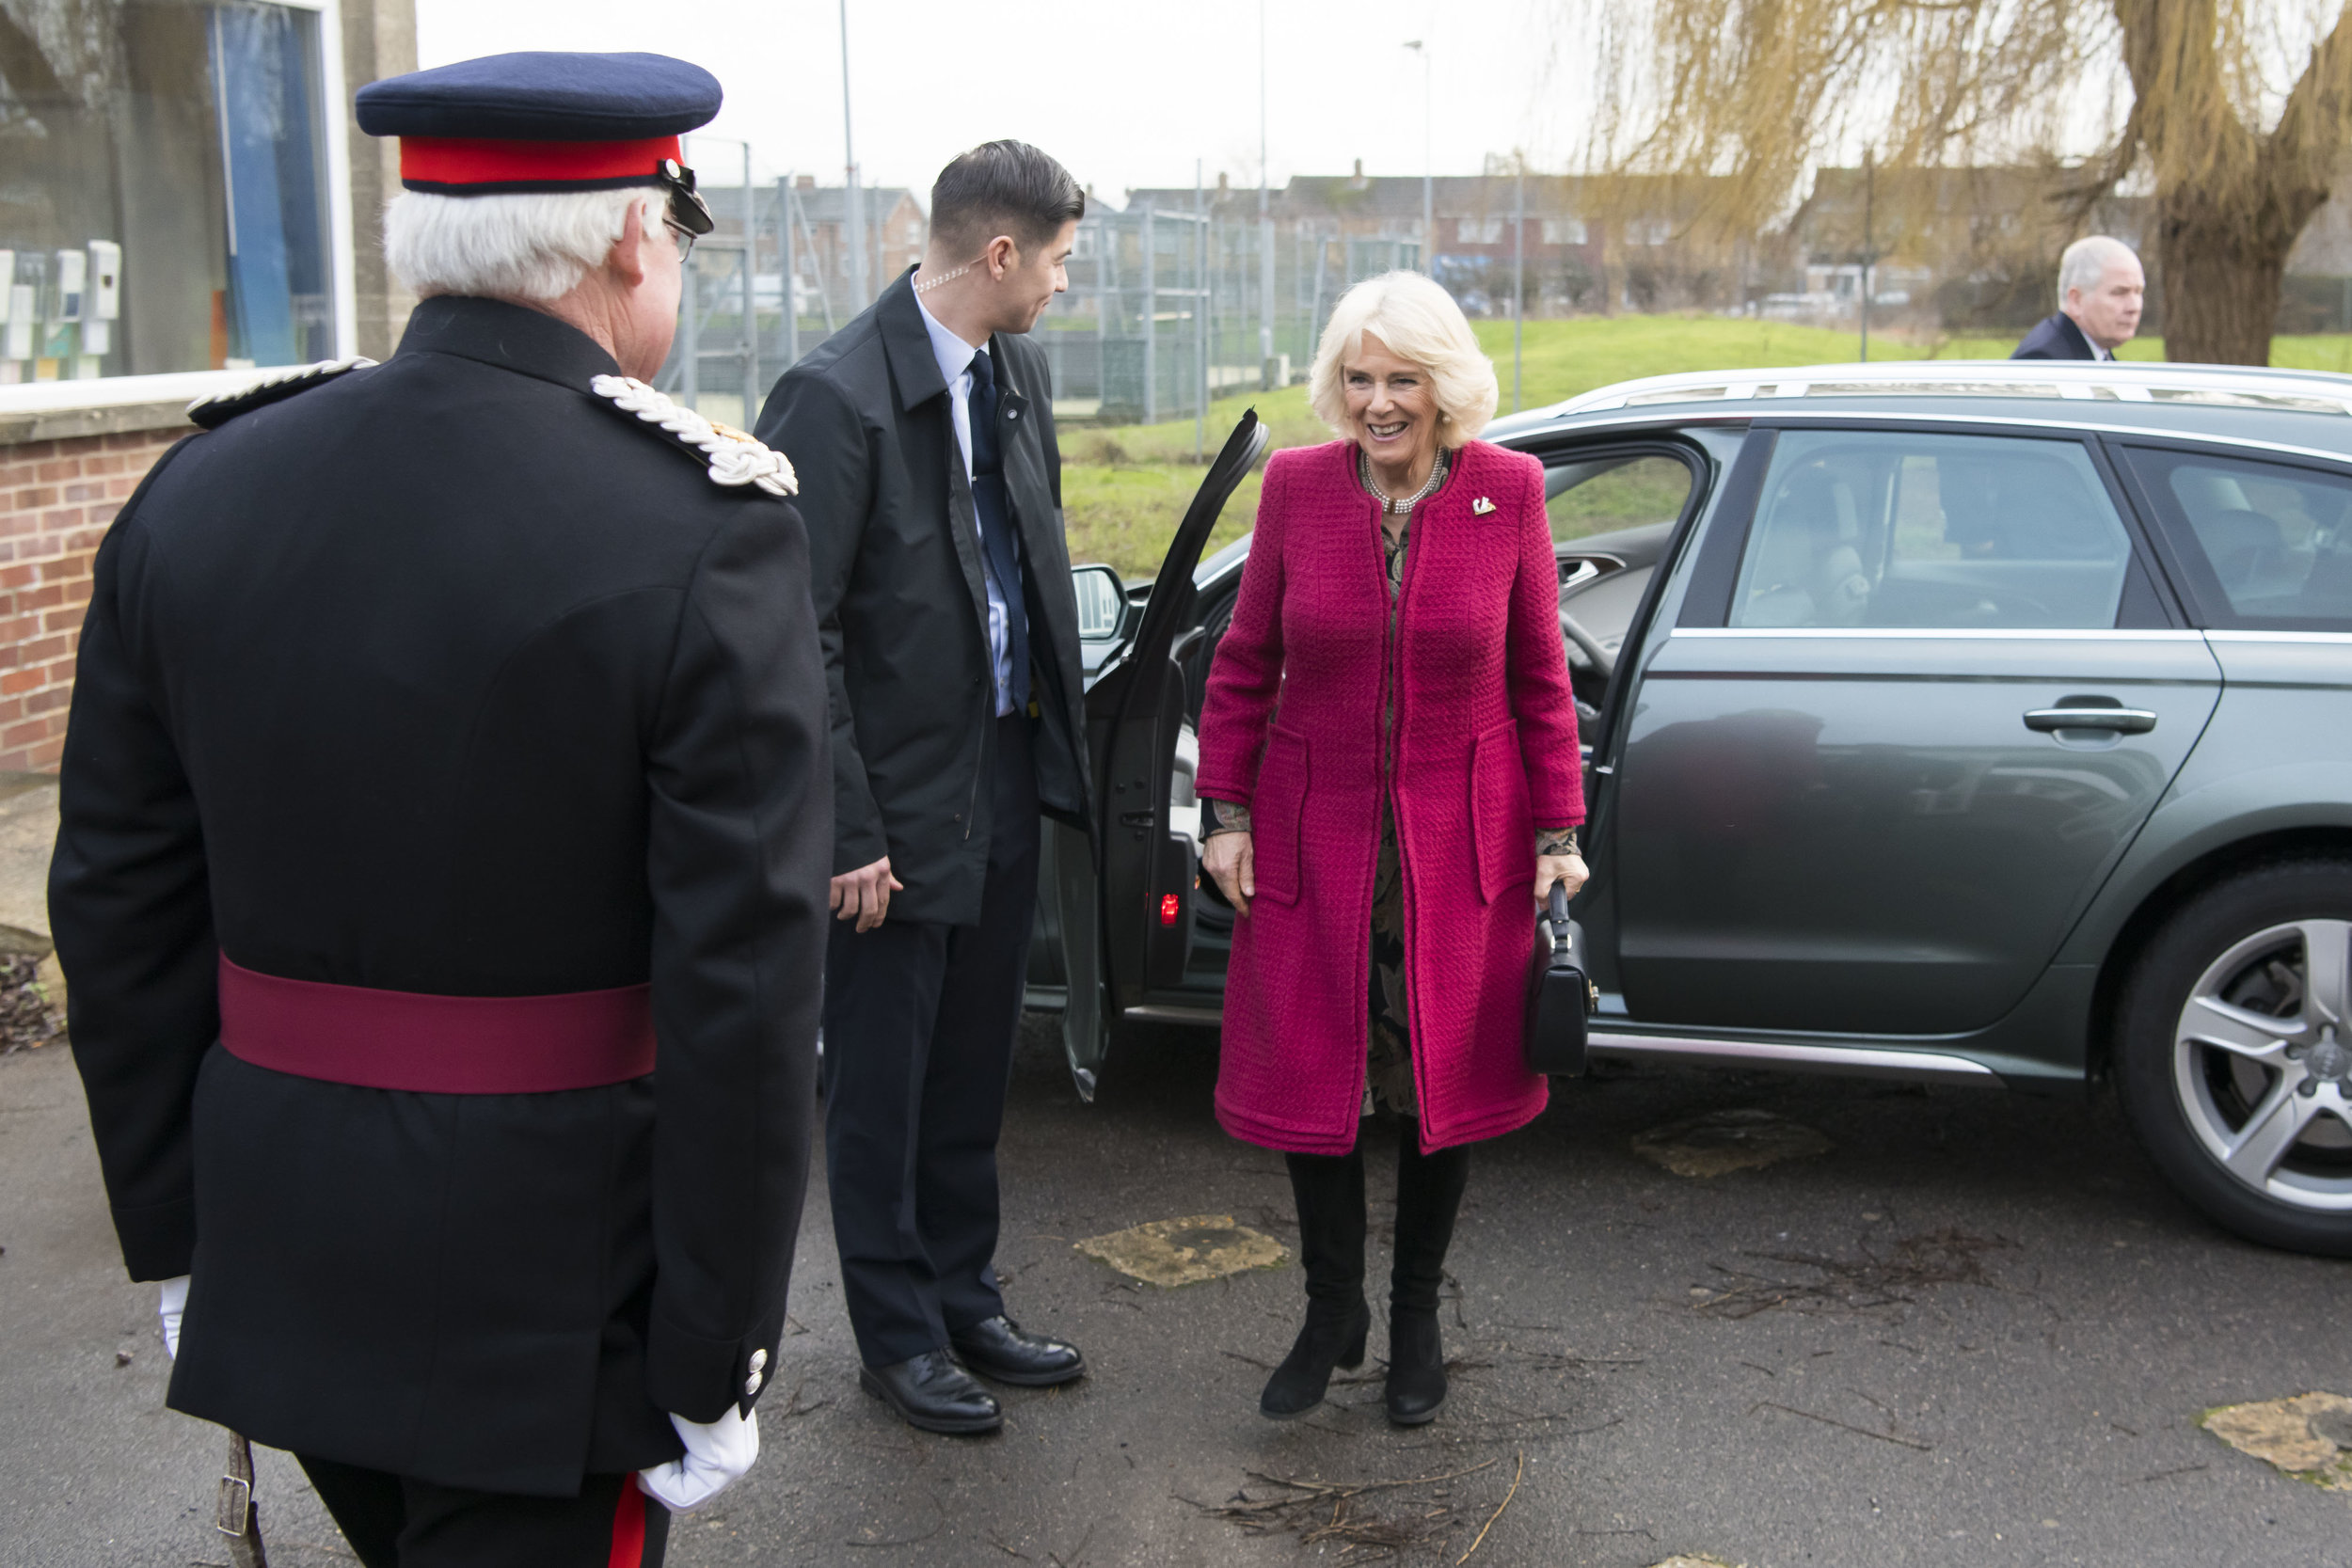  SWINDON, ENGLAND - JANUARY 24: The Duchess of Cornwall, Patron of the National Literacy Trust, arrives at the Lyndhurst Centre where she met foster carers and children on January 24, 2019 in Swindon, England. The Lyndhurst Centre is the Swindon offi